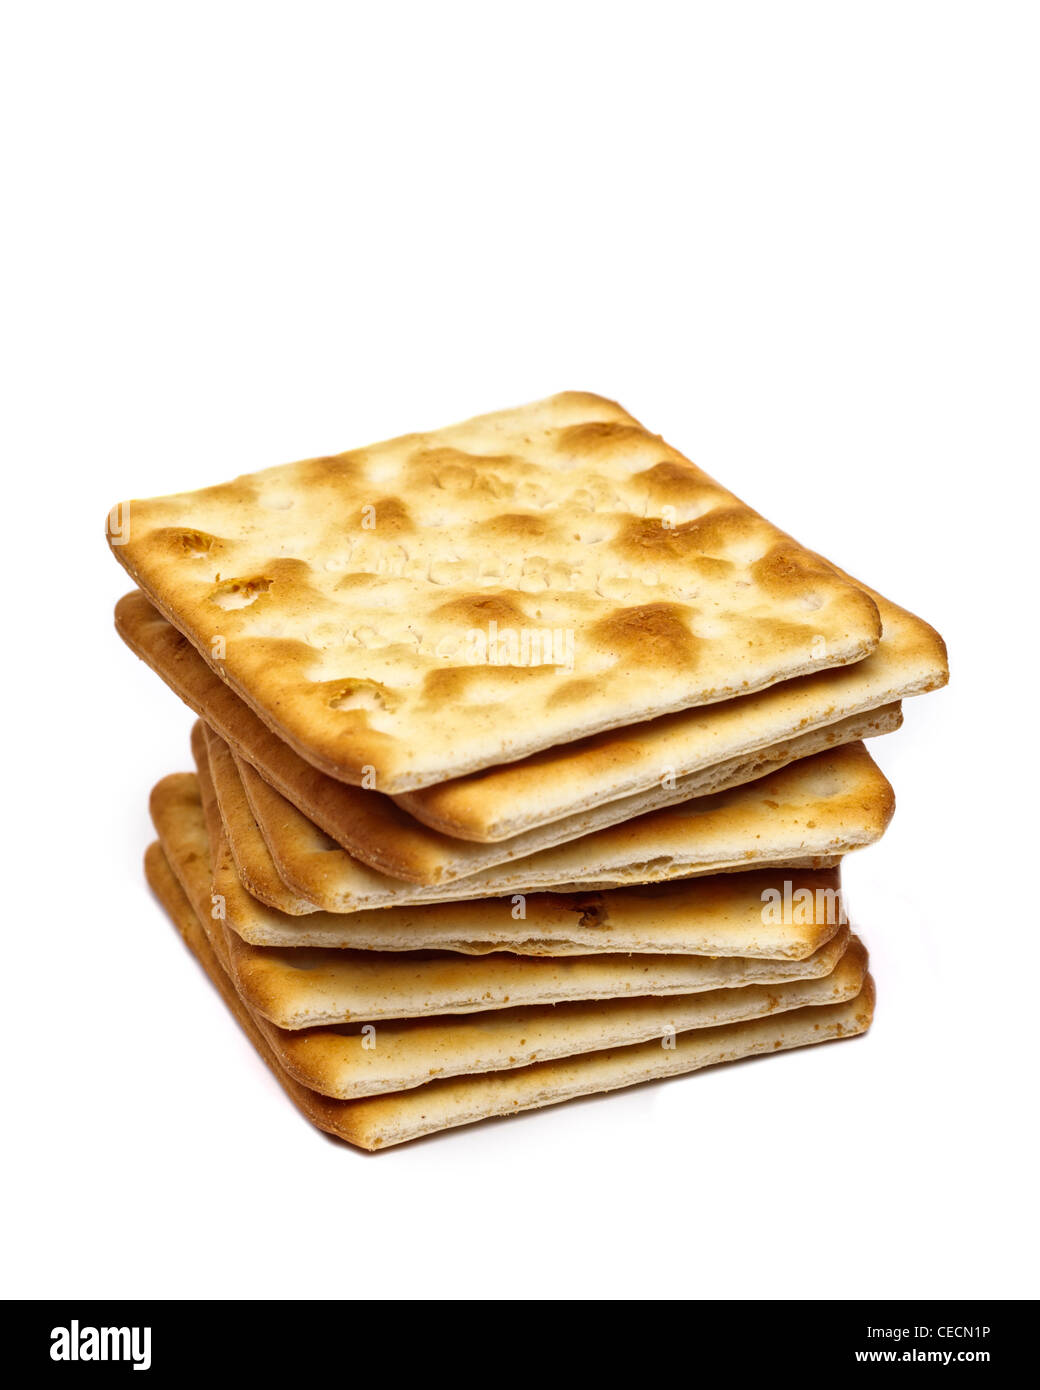 Pile of Jacobs cream crackers cheese biscuits on white background Stock Photo